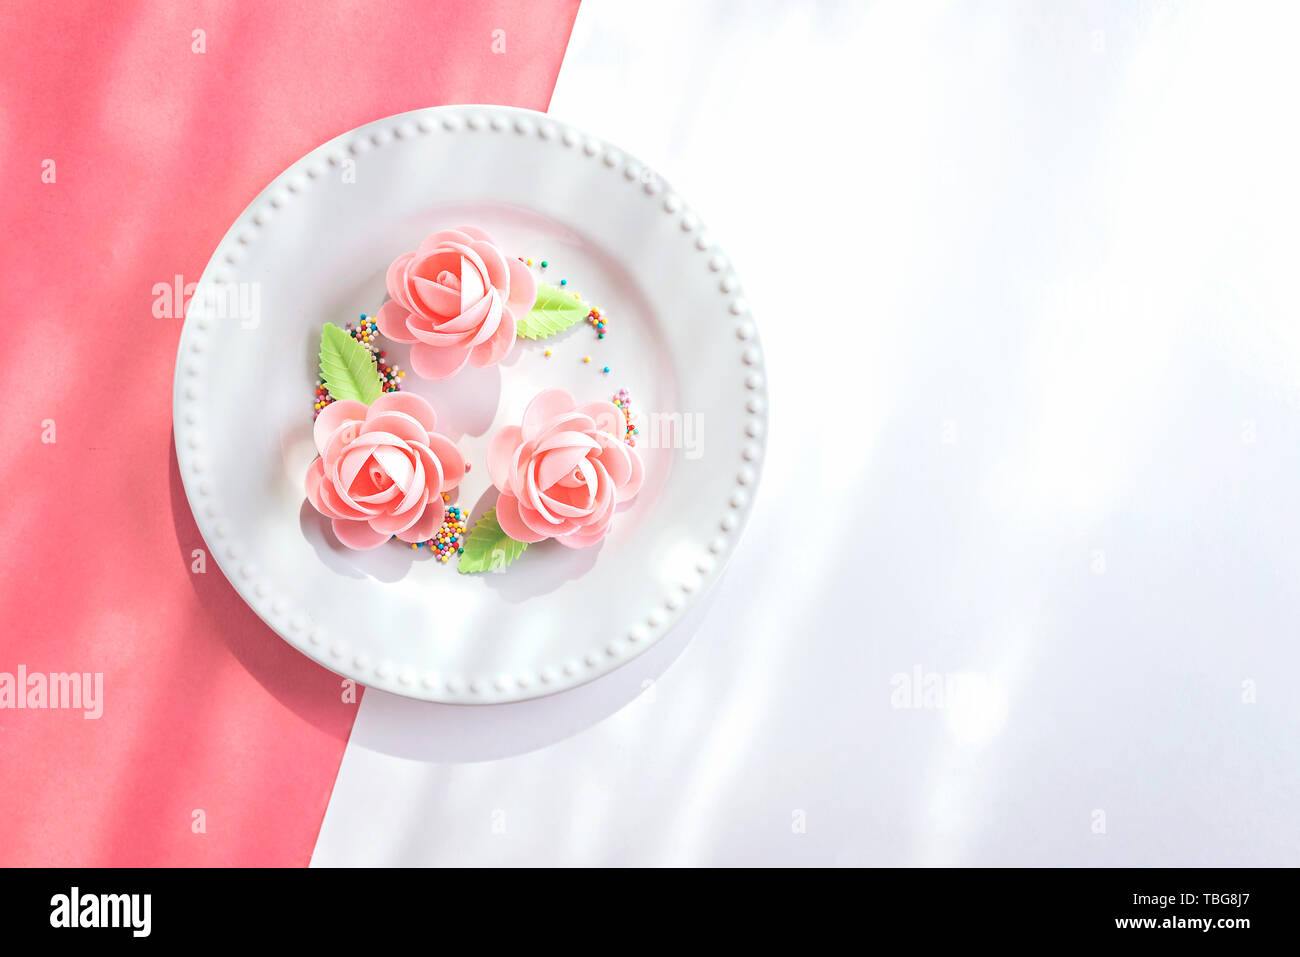 Delicate pink and white background with pastry roses and confetti on plate. Shot with mixed light. Top view, flat lay Stock Photo